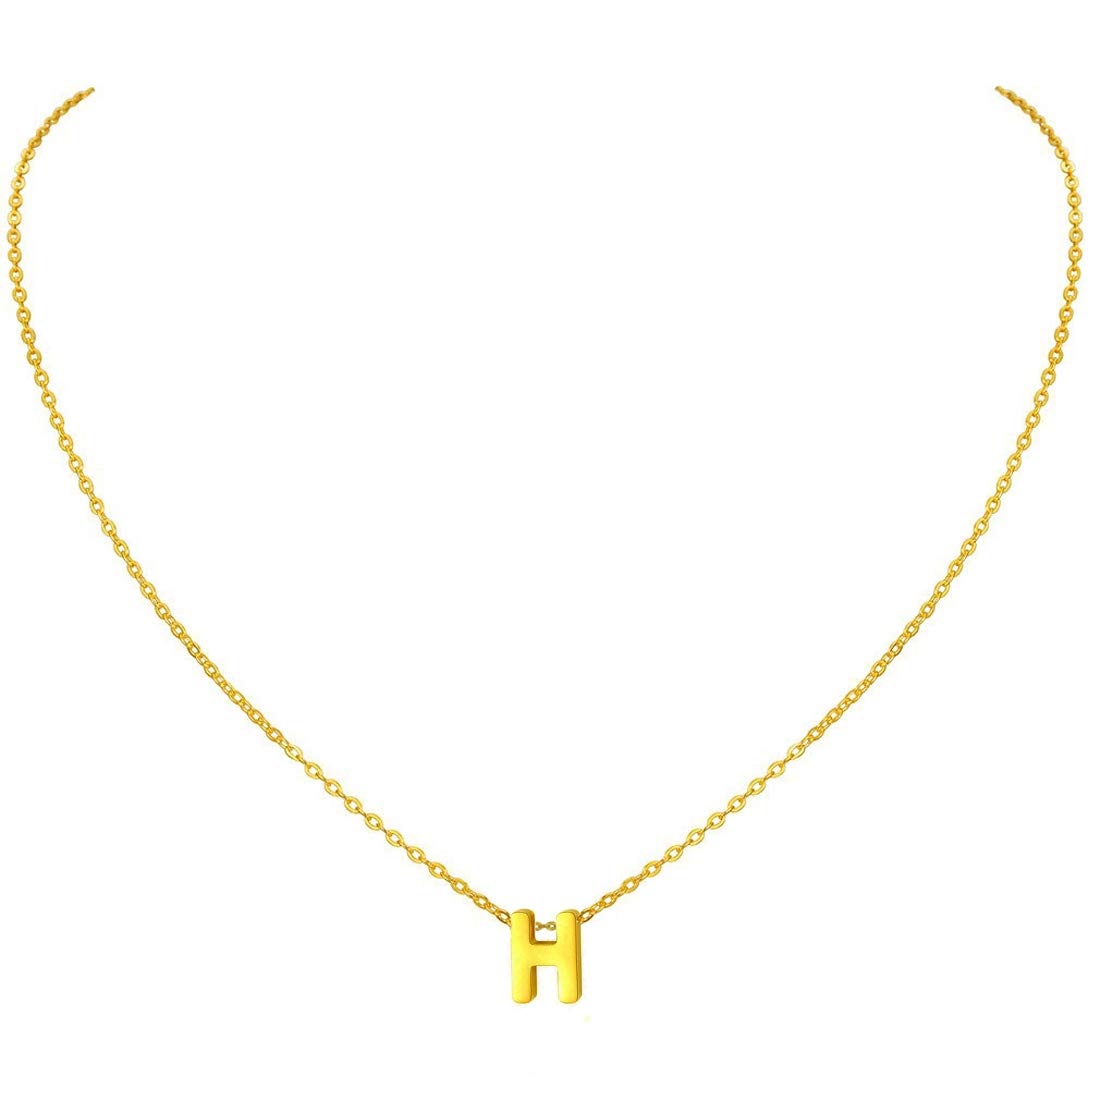 18K Gold Plated Stainless Steel Initial Necklace Dainty Personalized Letter H Necklace for Women Girls